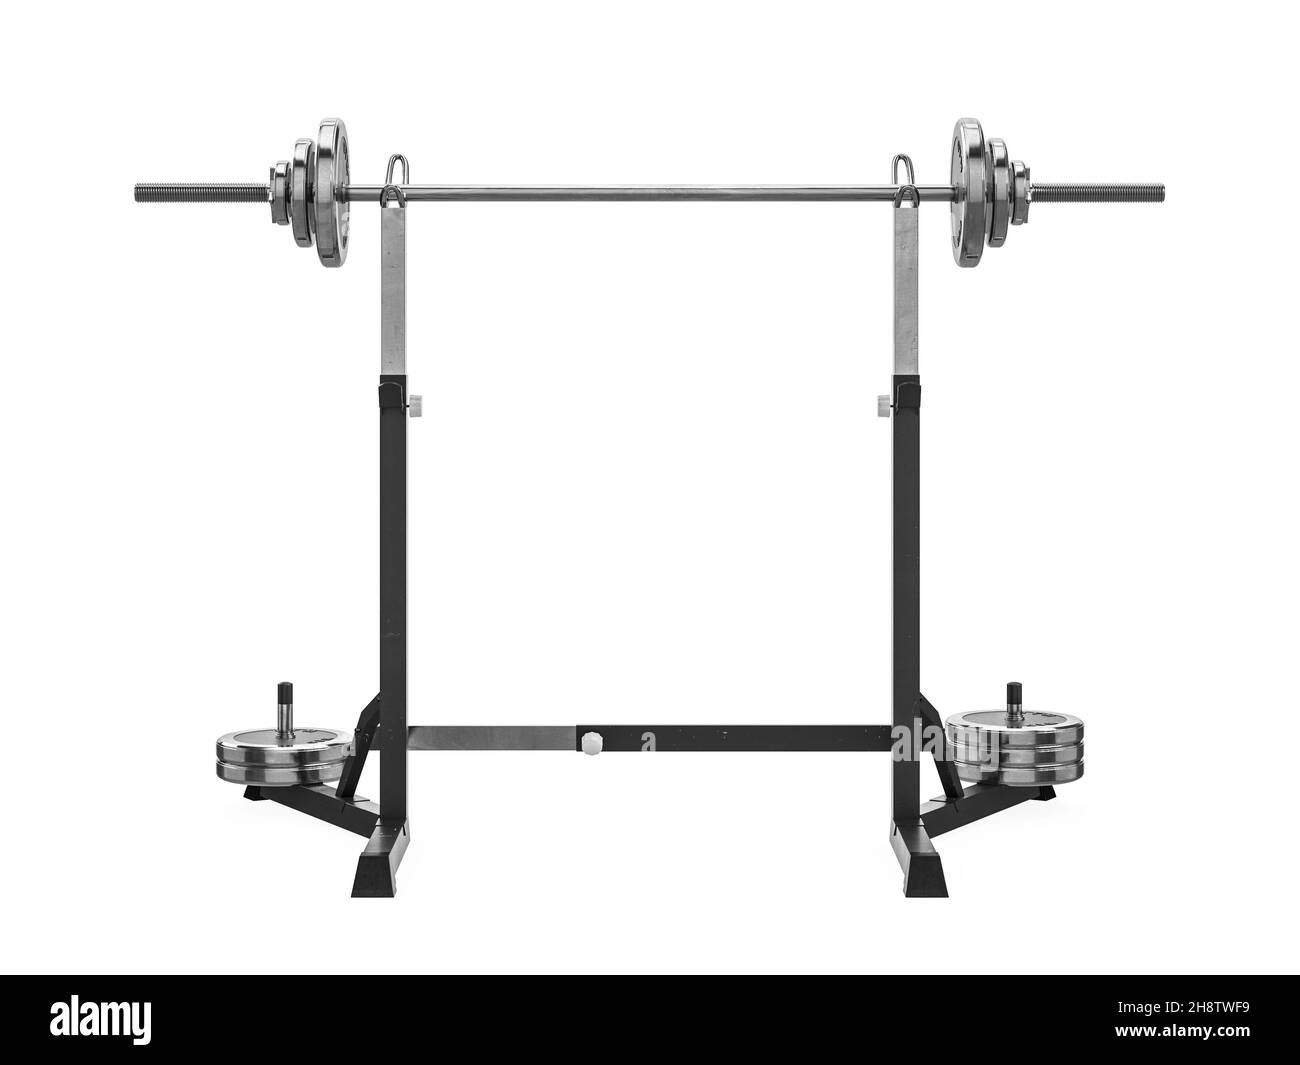 Multifunctional gym machine, front view isolated on white background. 3D Rendering, Illustration. Stock Photo